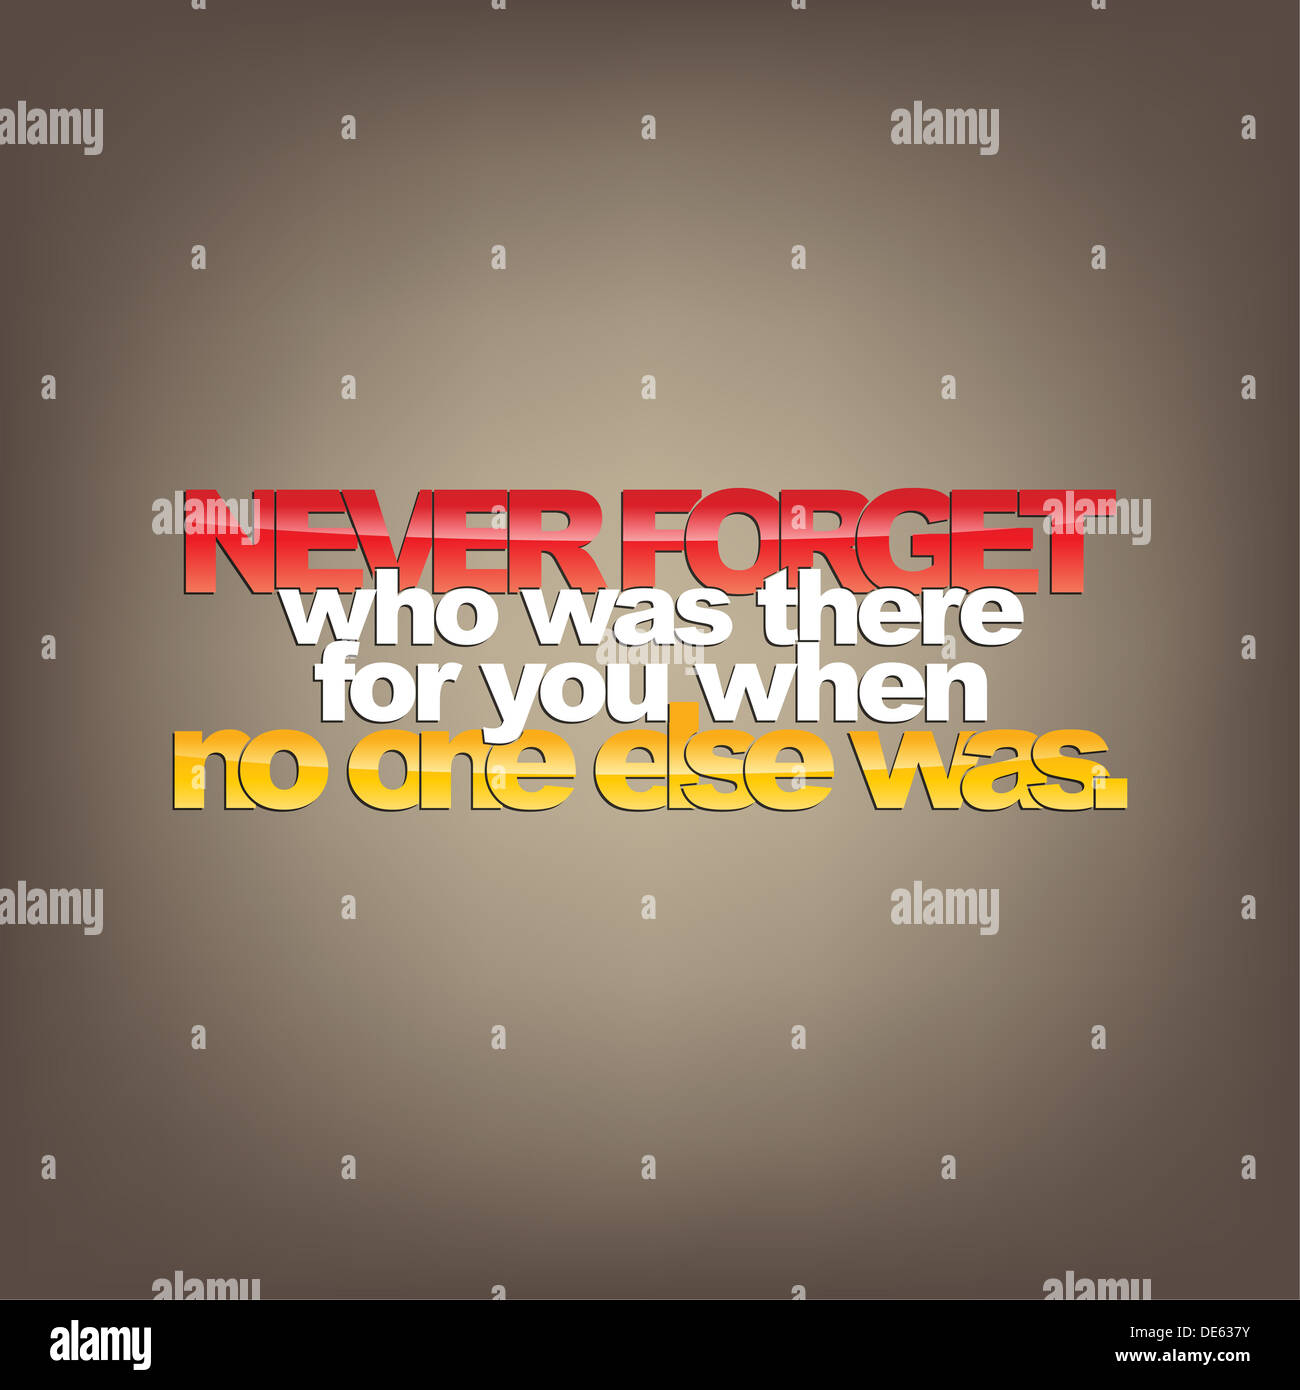 Never forget who was there for you when no one else was. Motivational background Stock Photo